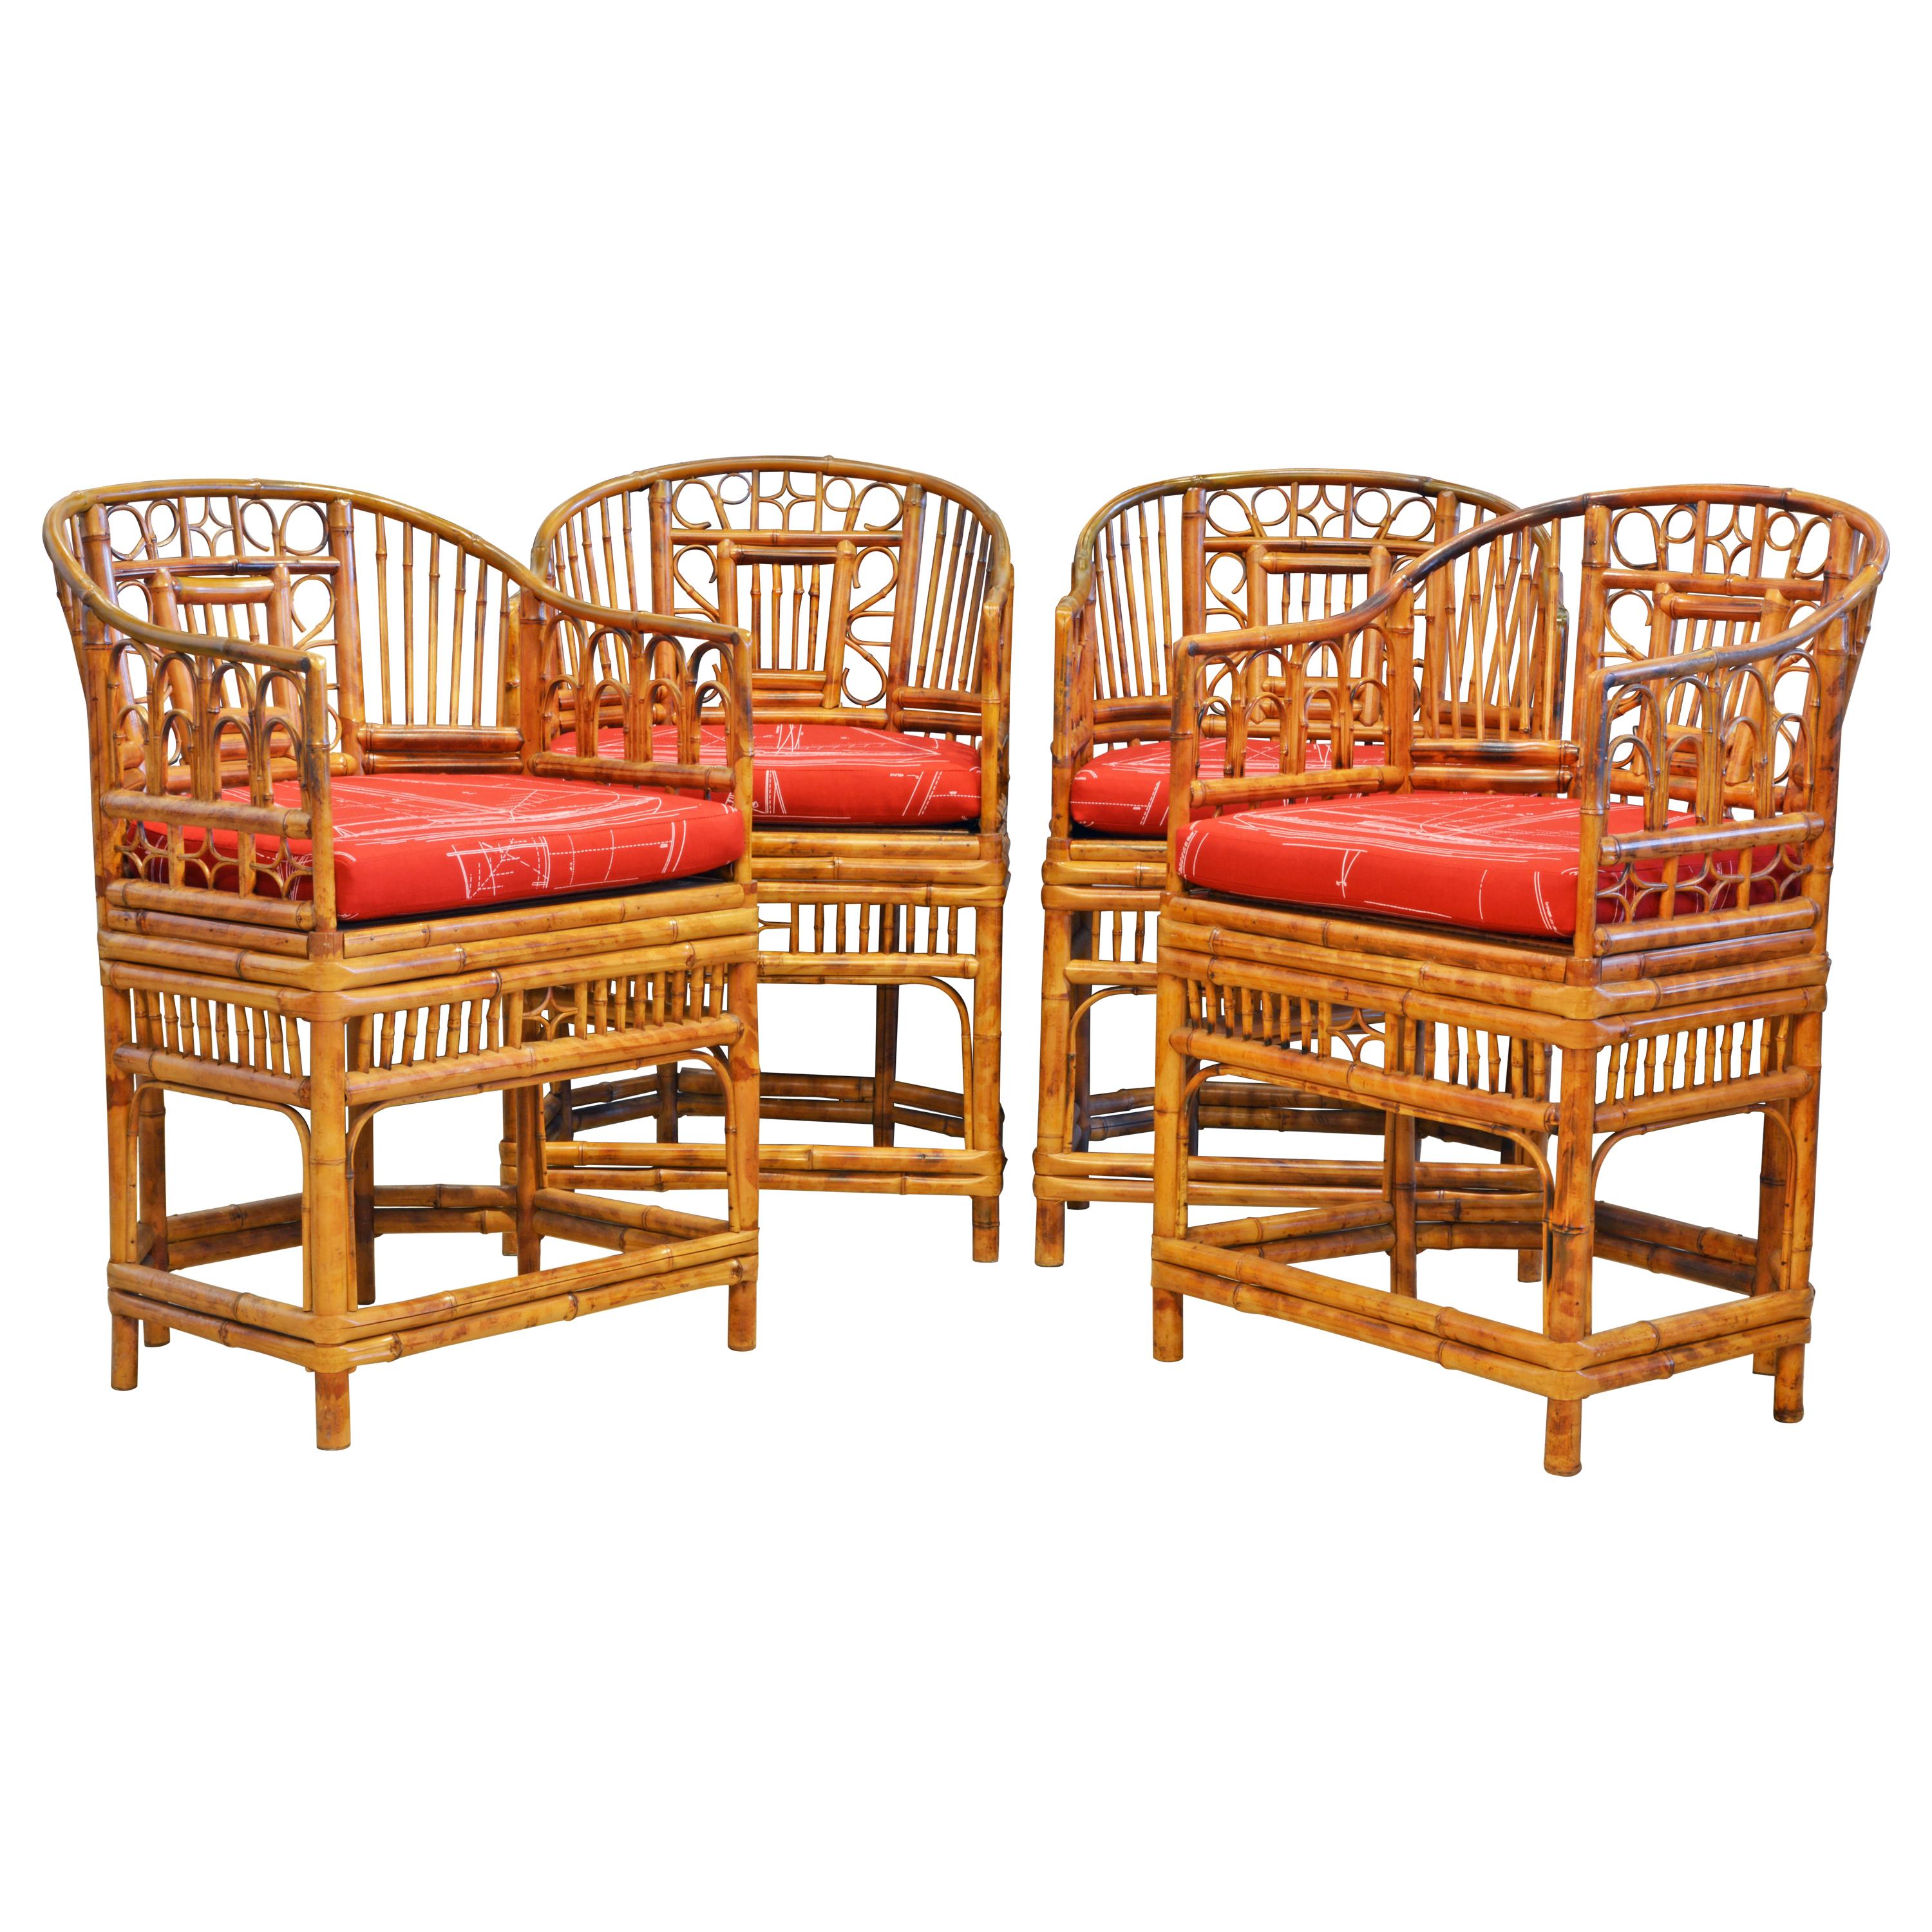 Group of Four Brighton Pavilion Style Chinoiserie Chippendale Bamboo Armchairs